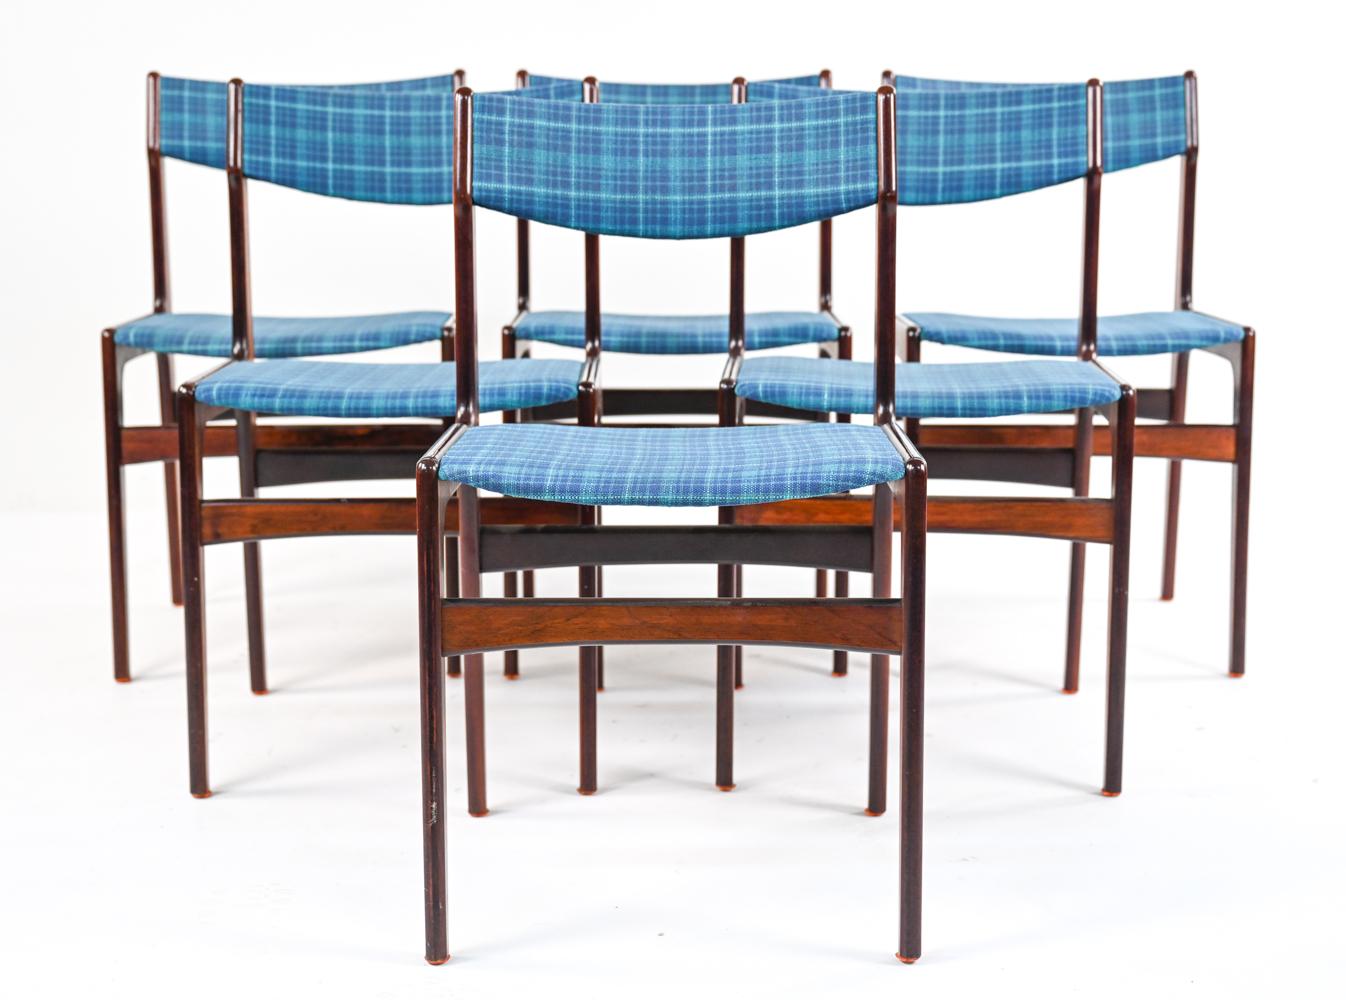 Set of (6) dining side chairs in rare rosewood veneer with period woven plaid upholstery. Designed by Erik Buch; attributed to manufacturer O.D. Mobler.